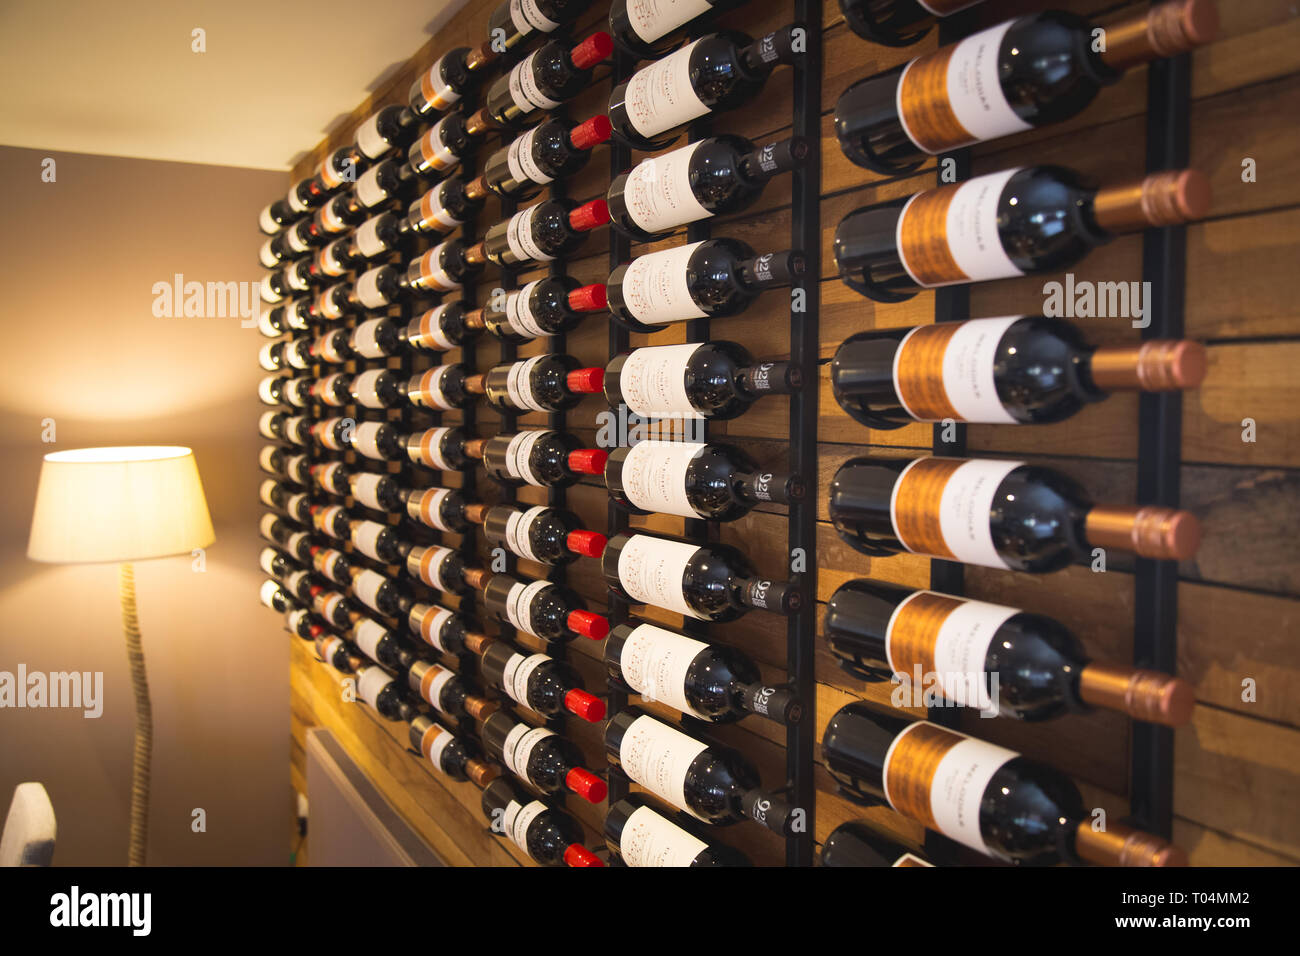 bottles of red wine on wall display in restaurant Stock Photo